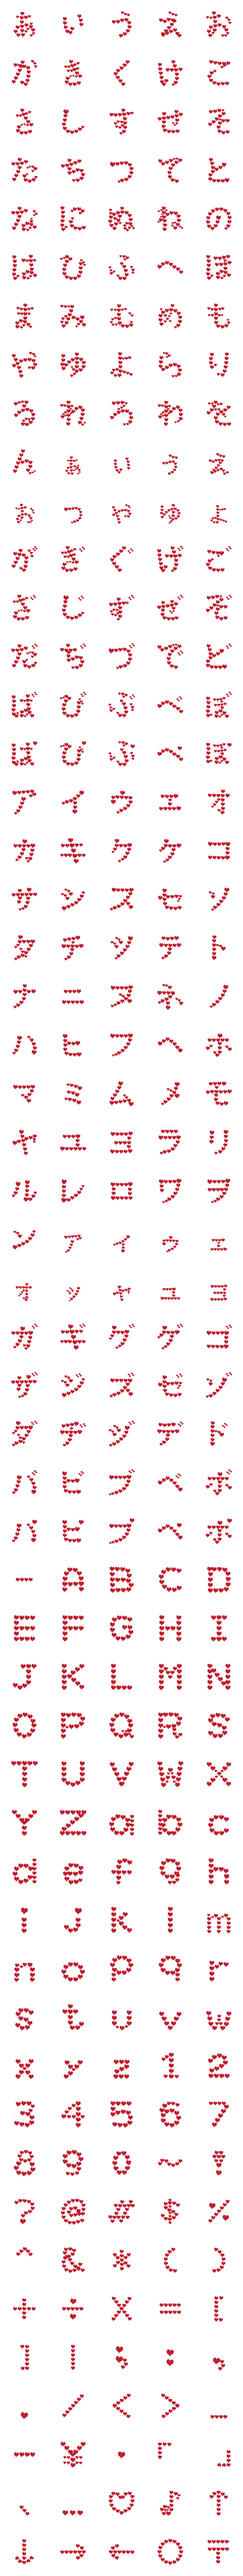 [LINE絵文字]Heart Fonts Emoji (Japanese and English)の画像一覧